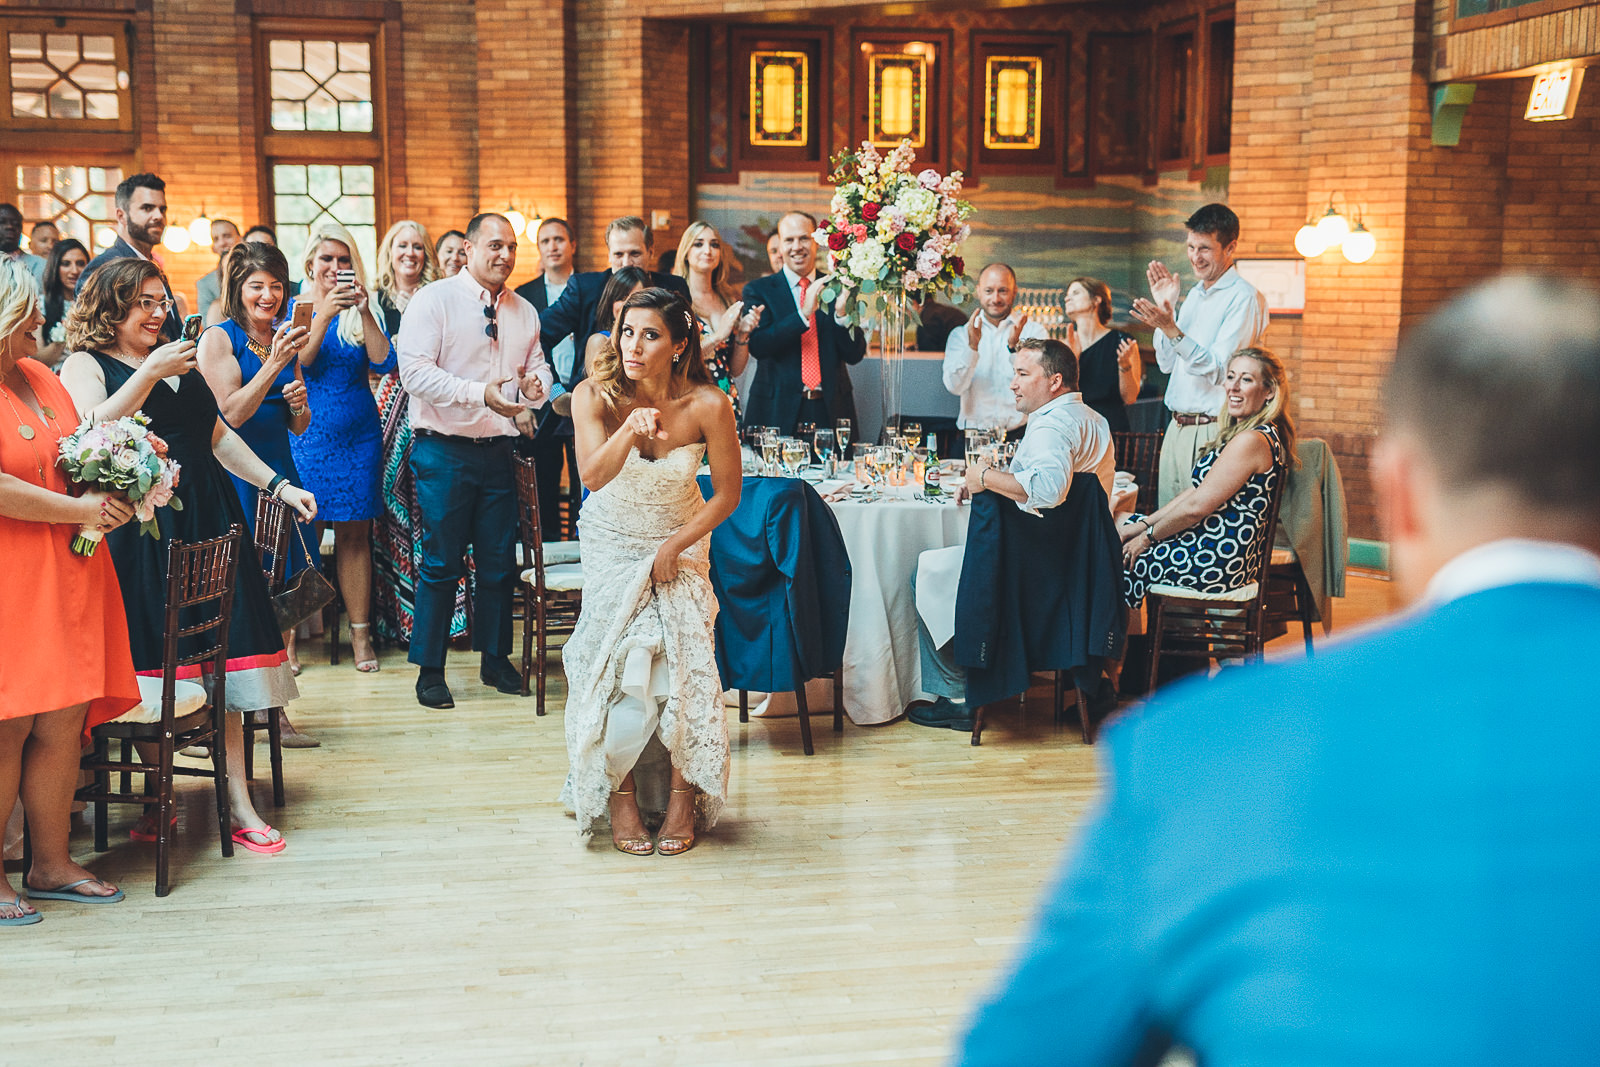 56 bride and groom silly - Natalie + Alan // Chicago Wedding Photographer at Cafe Brauer